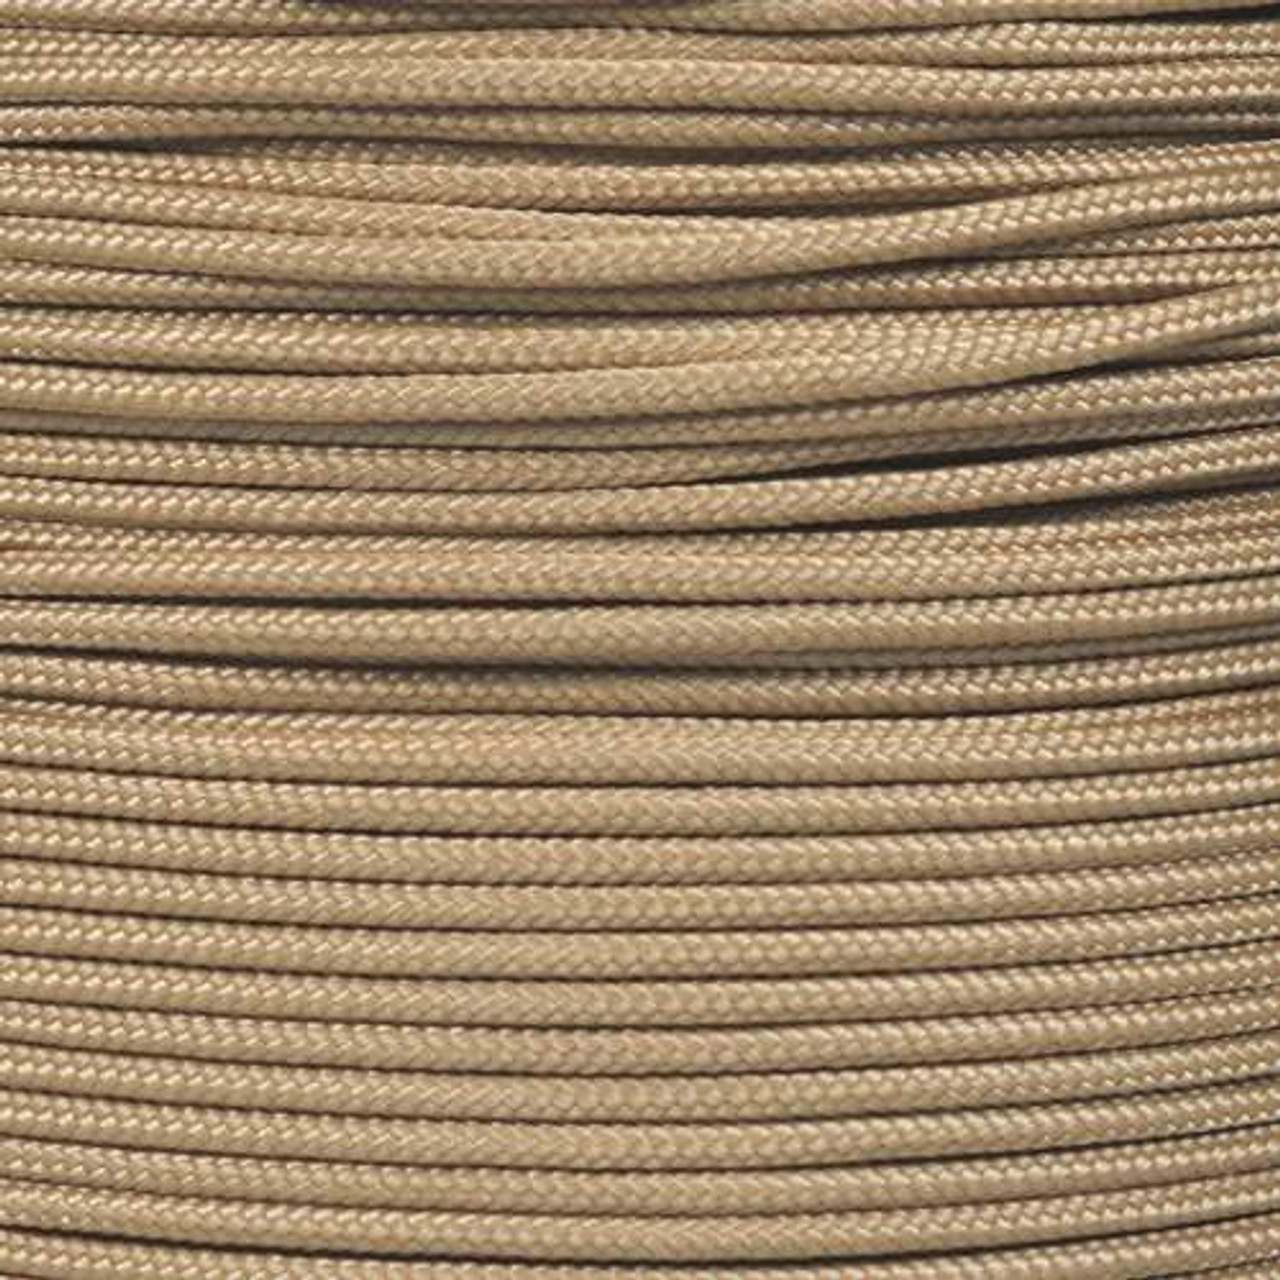 Colonial Blue 325 3-Strand Commercial Grade Paracord